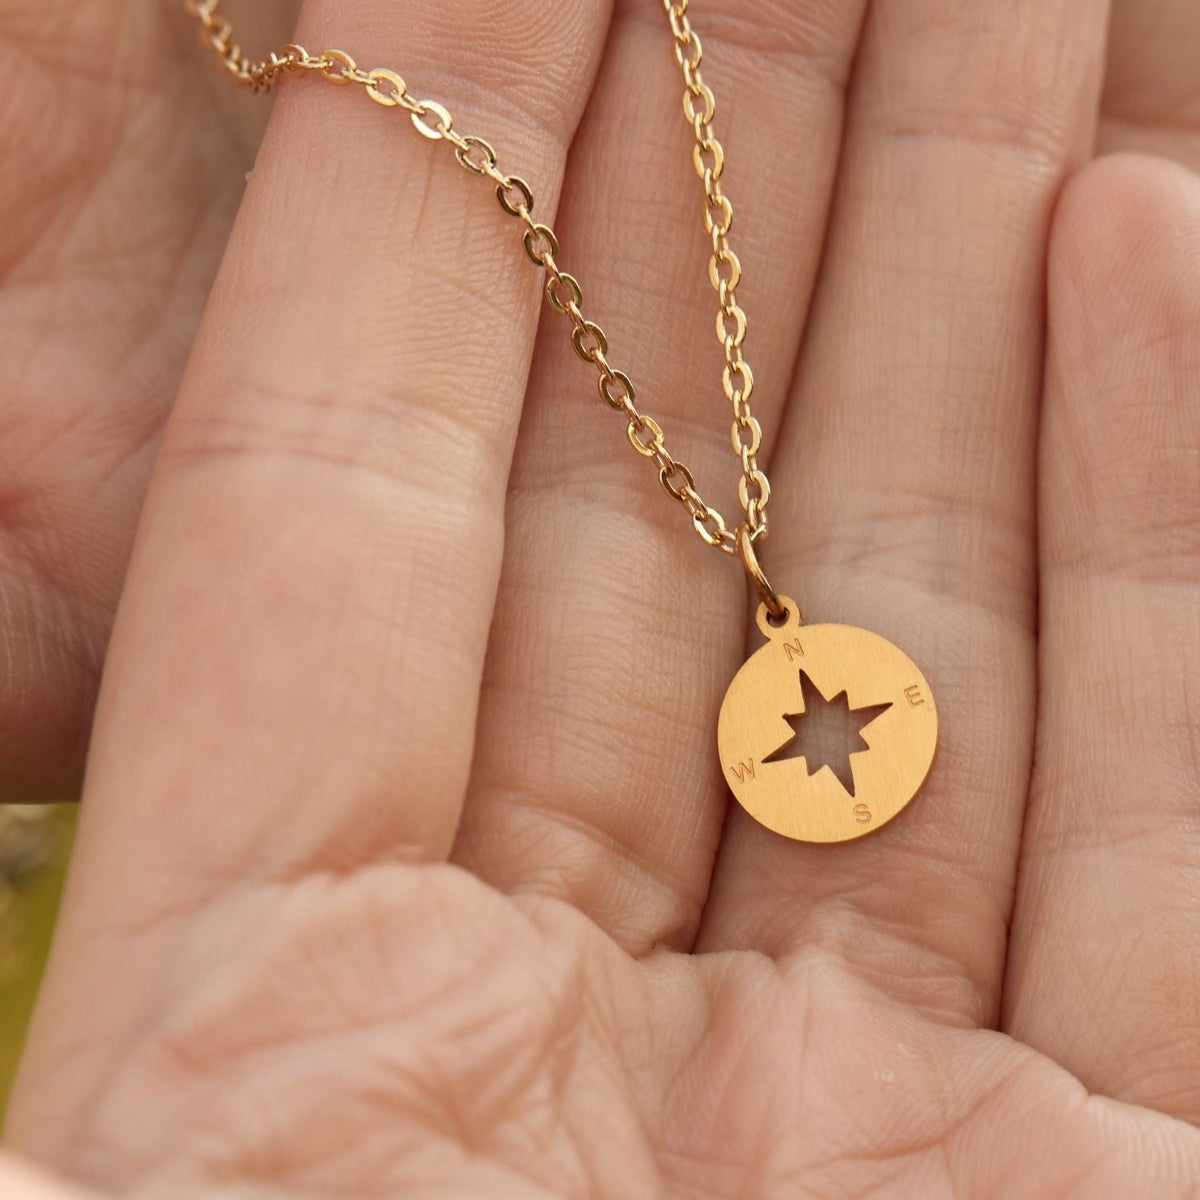 To the Best Mother in Law (From Daughter in Law) | Man of My Dreams | Compass Necklace